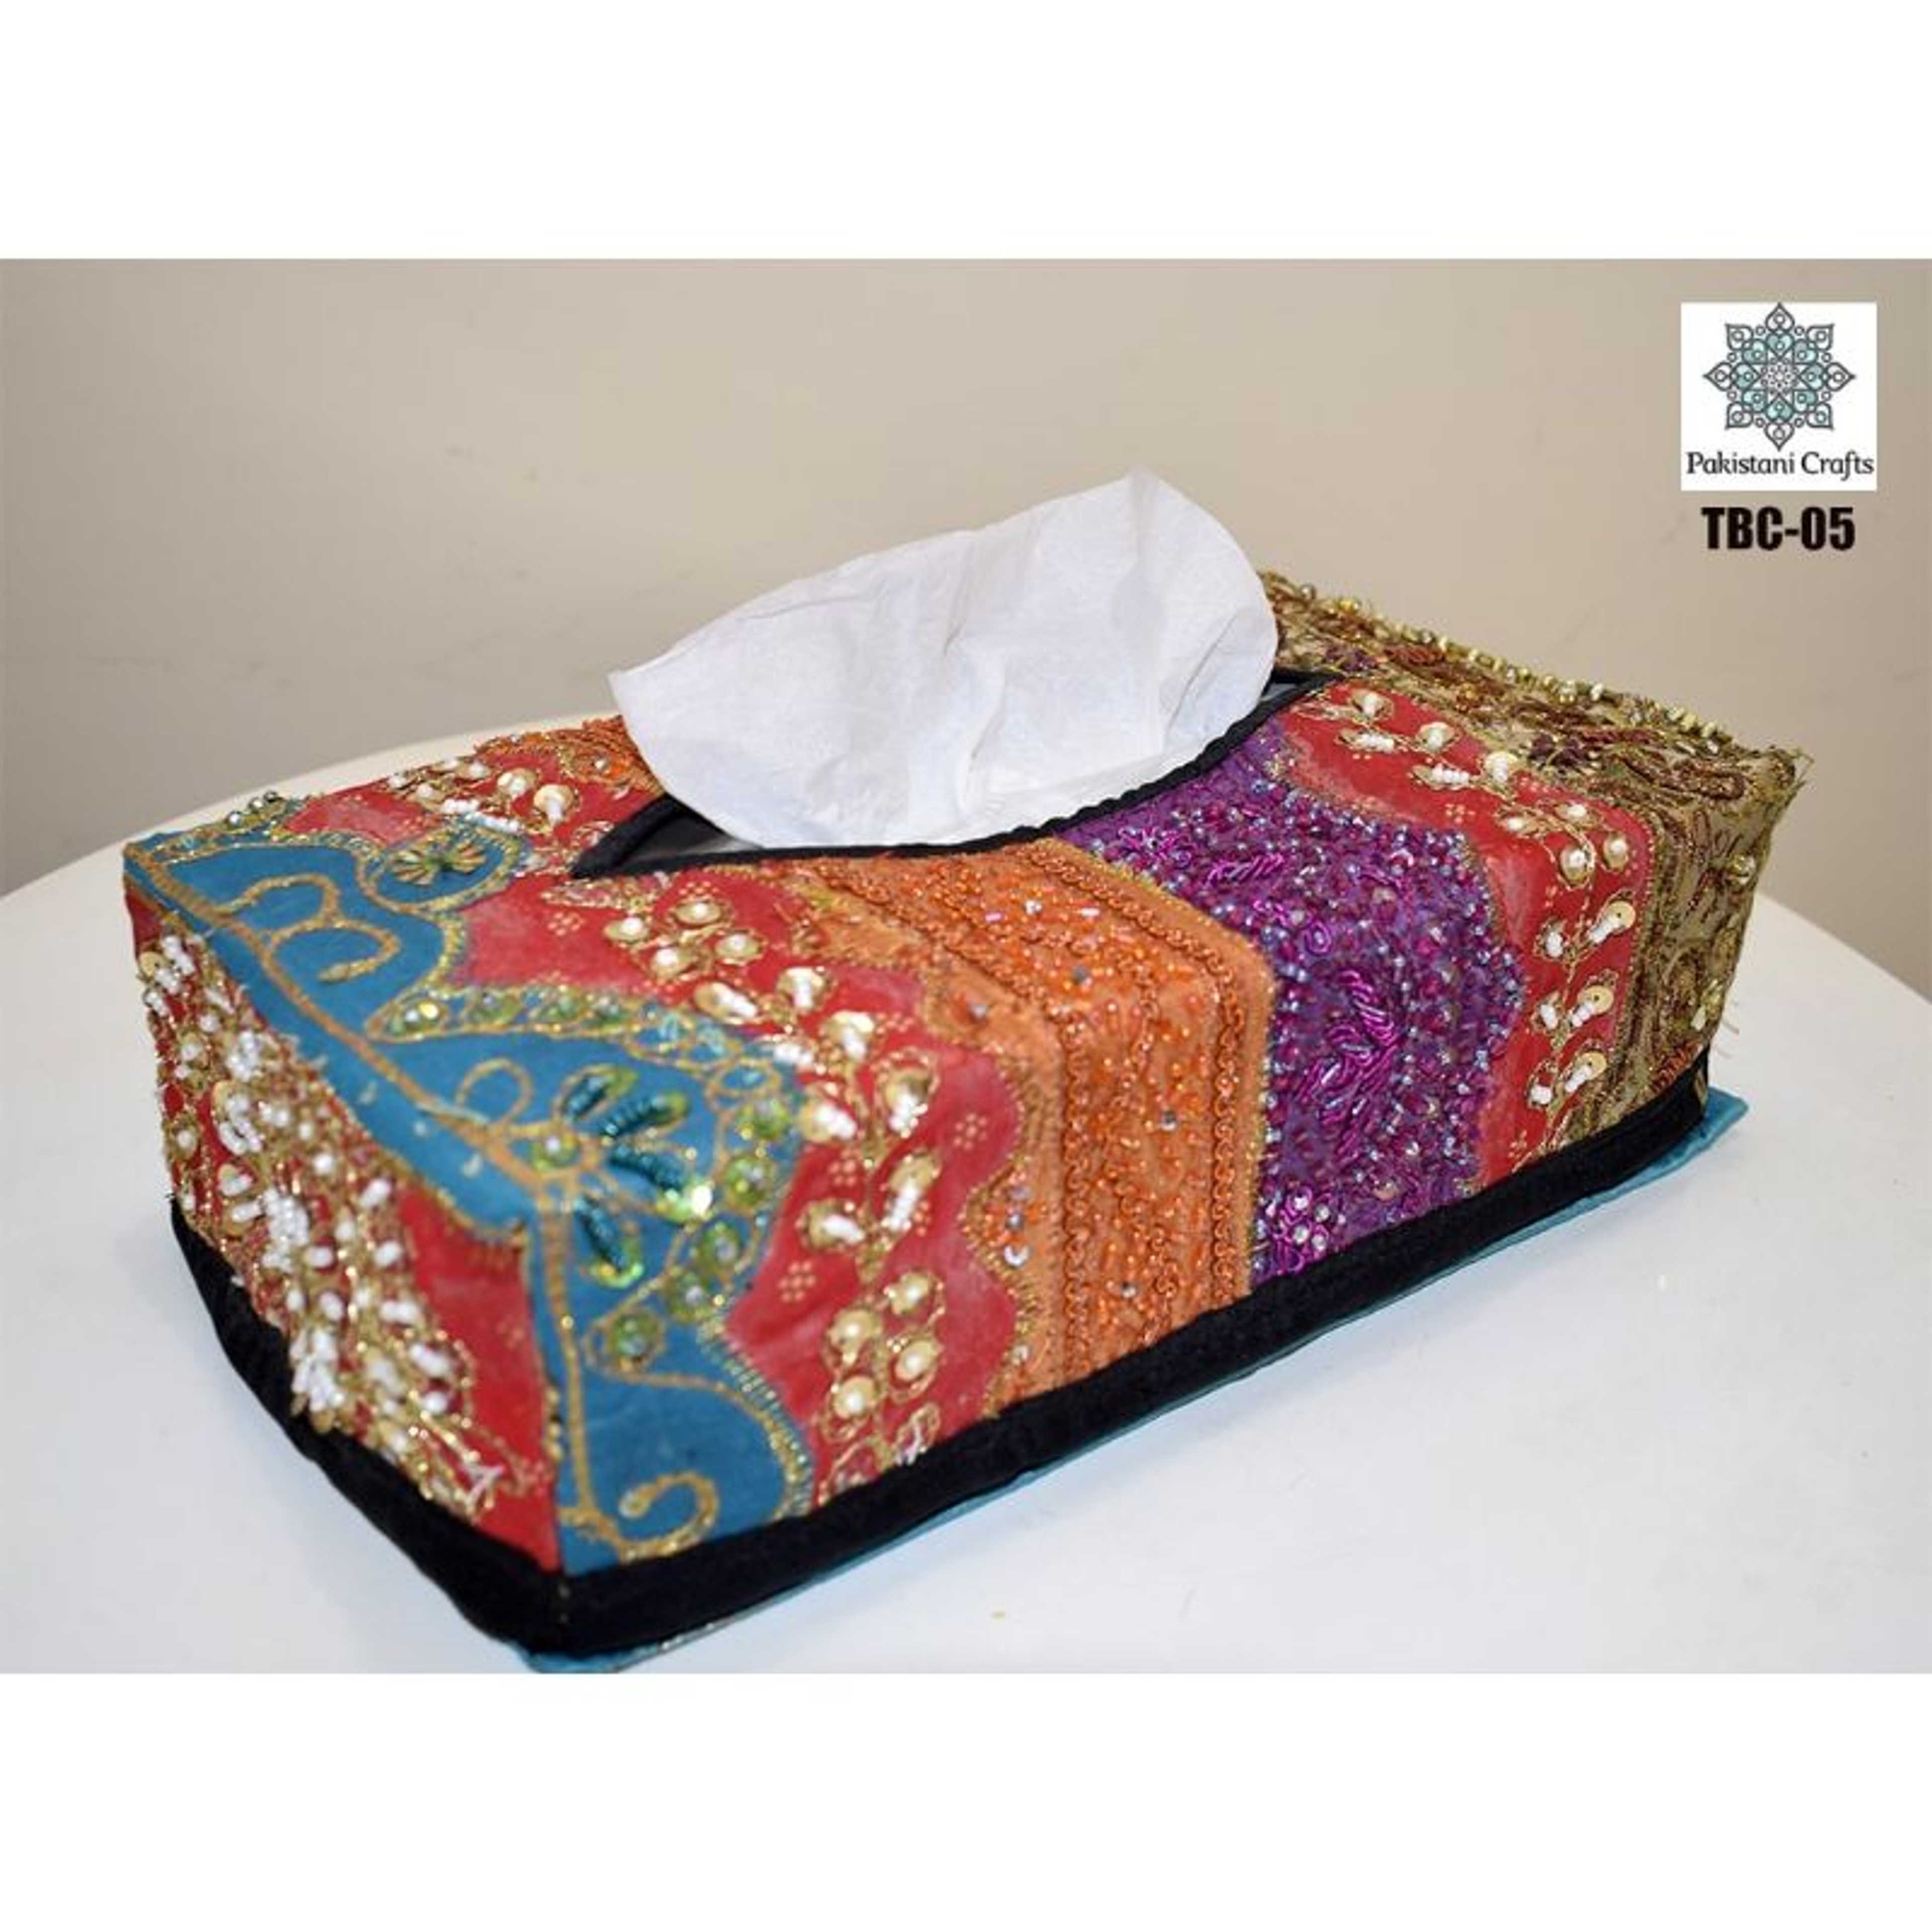 Sindhi Hand Embroidery Fabric Tissue Box Cover